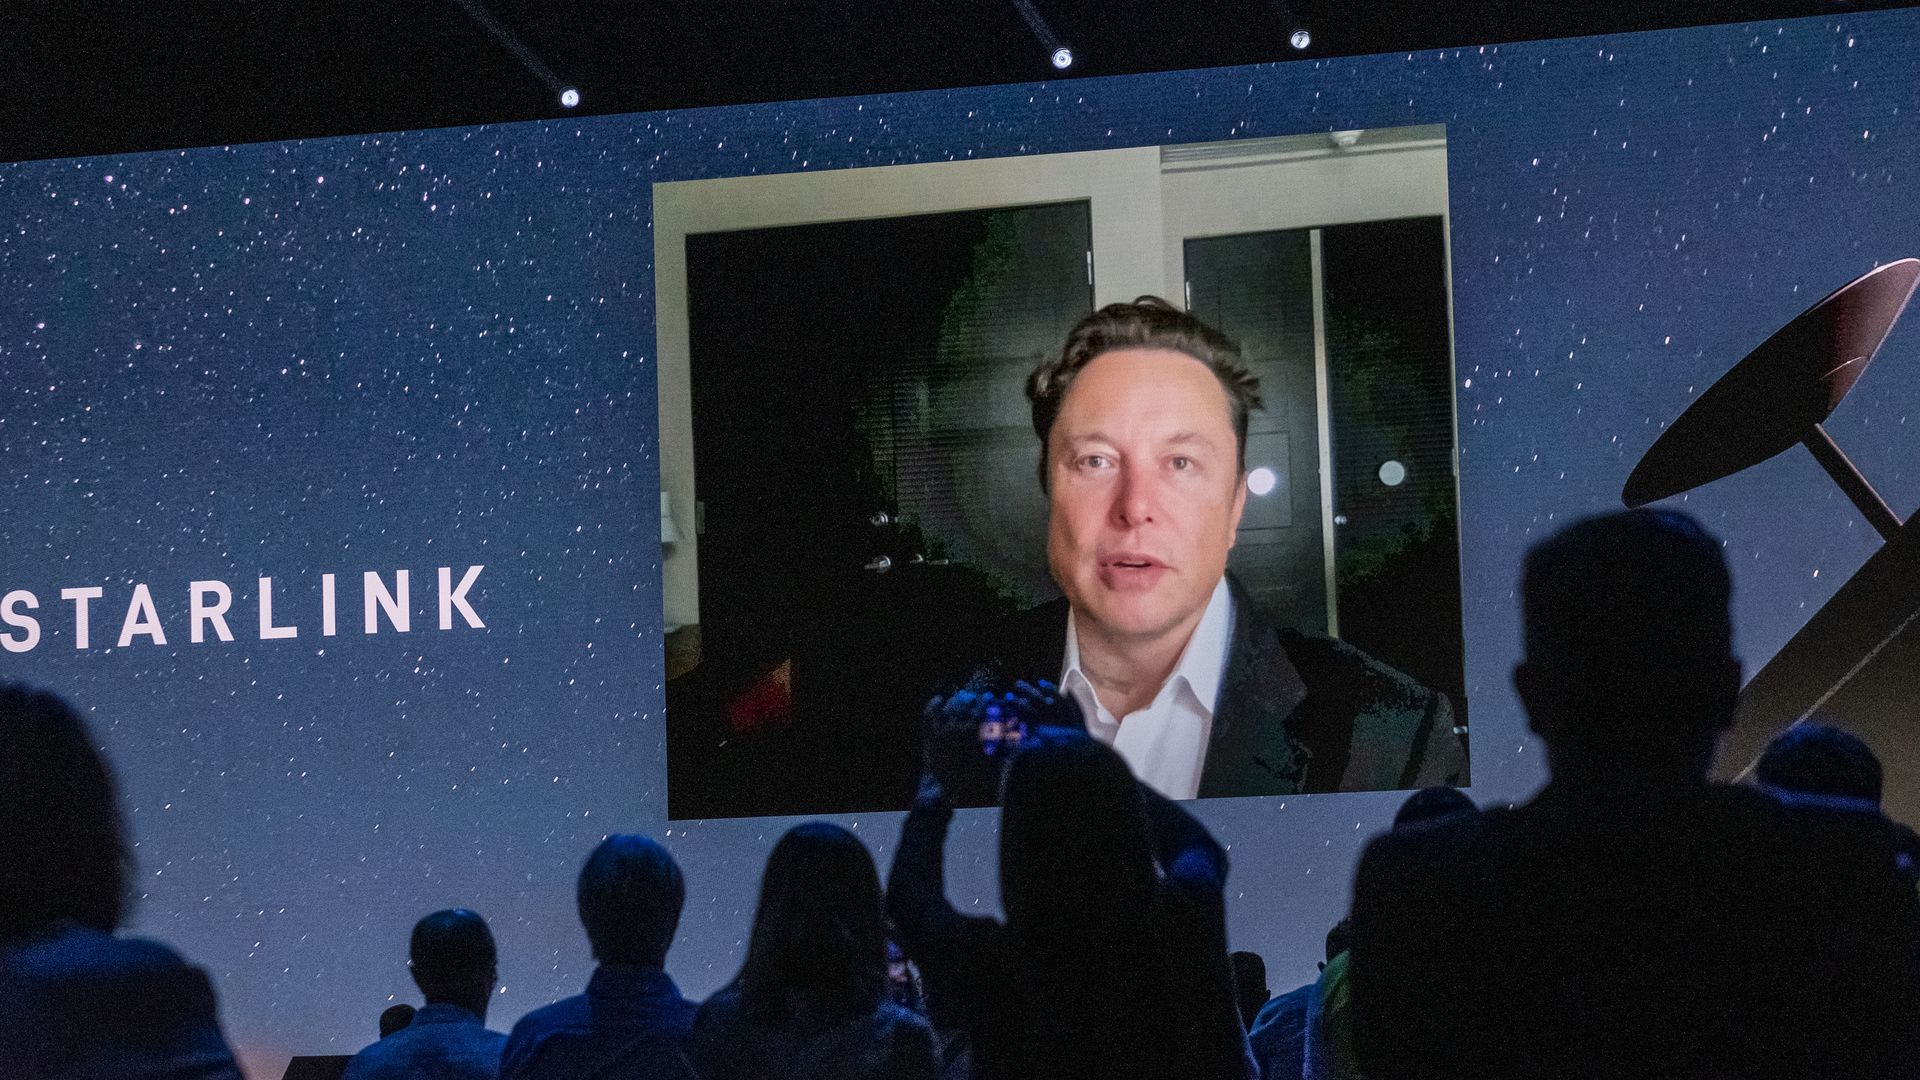 Tesla CEO Elon Musk gives a keynote speech via video conference at the Mobile World Congress (MWC) fair on June 29, 2021 in Barcelona, Spain.